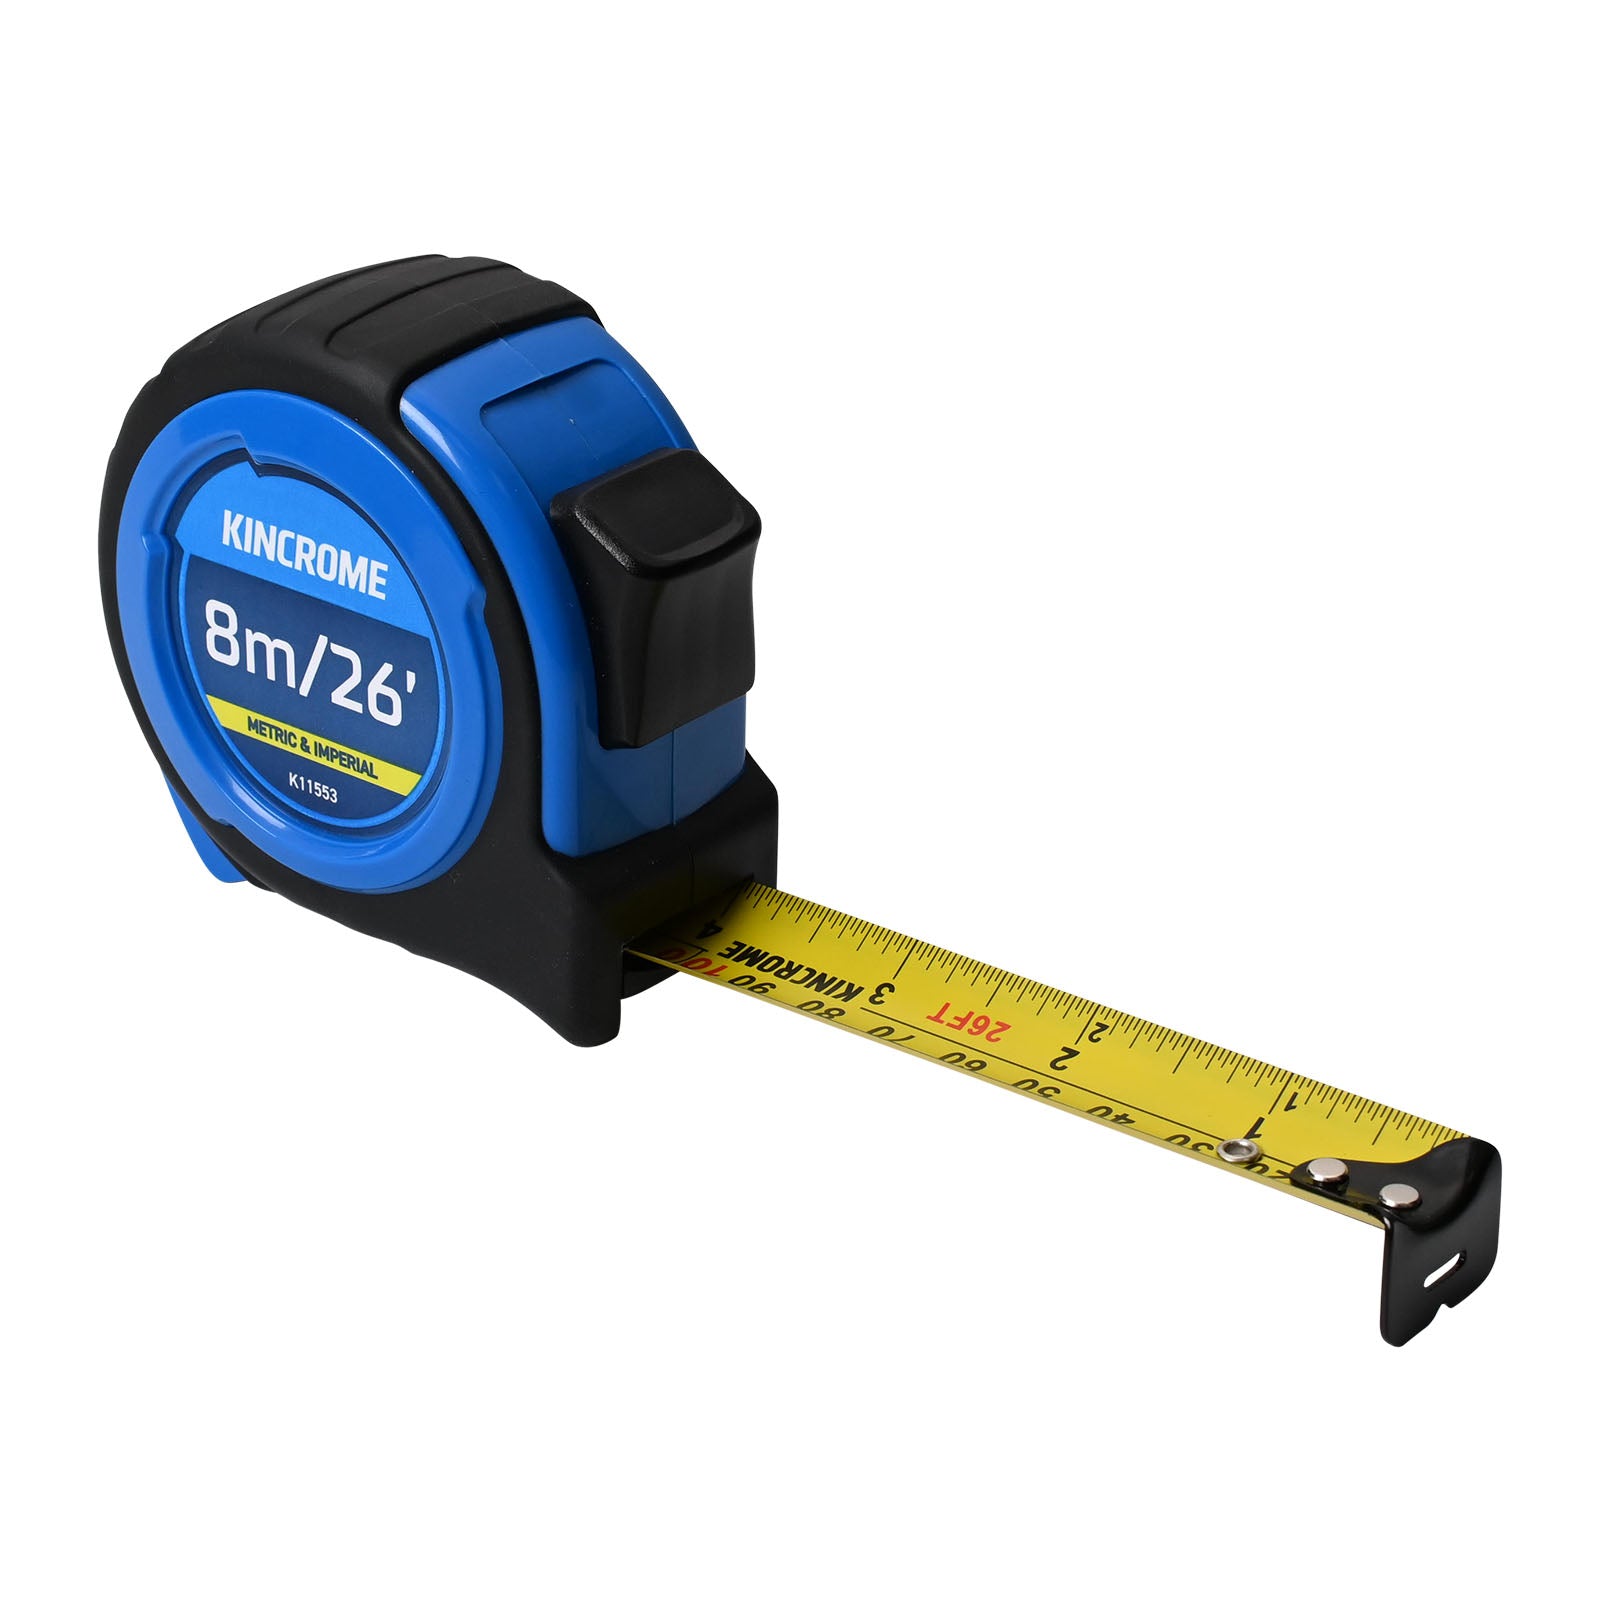 8M/26ft Tape Measure, Metric & Imperial - K11553 by Kincrome